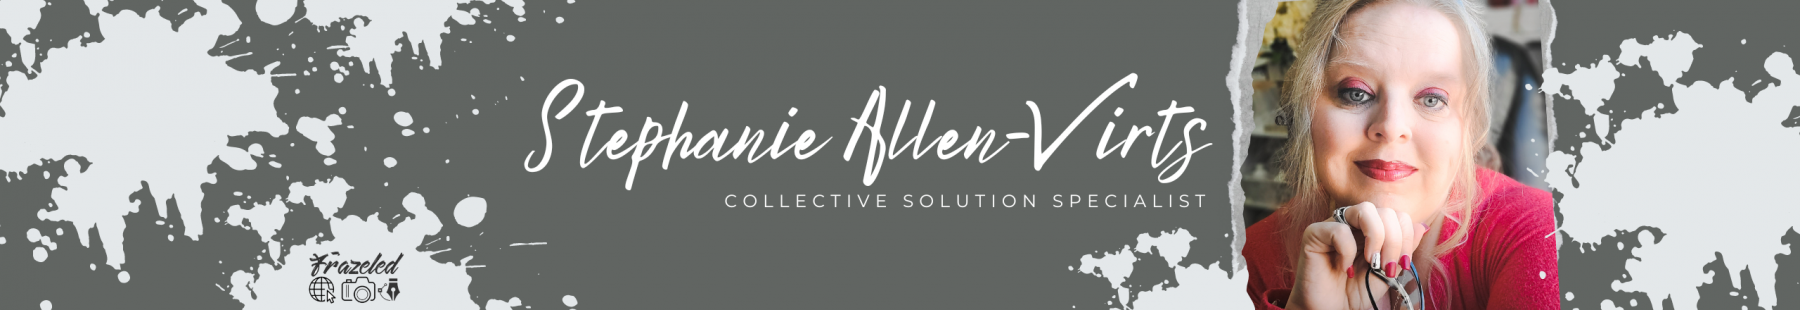 Stephanie_Allen-Virts_Collective_Solution_Specialist.png